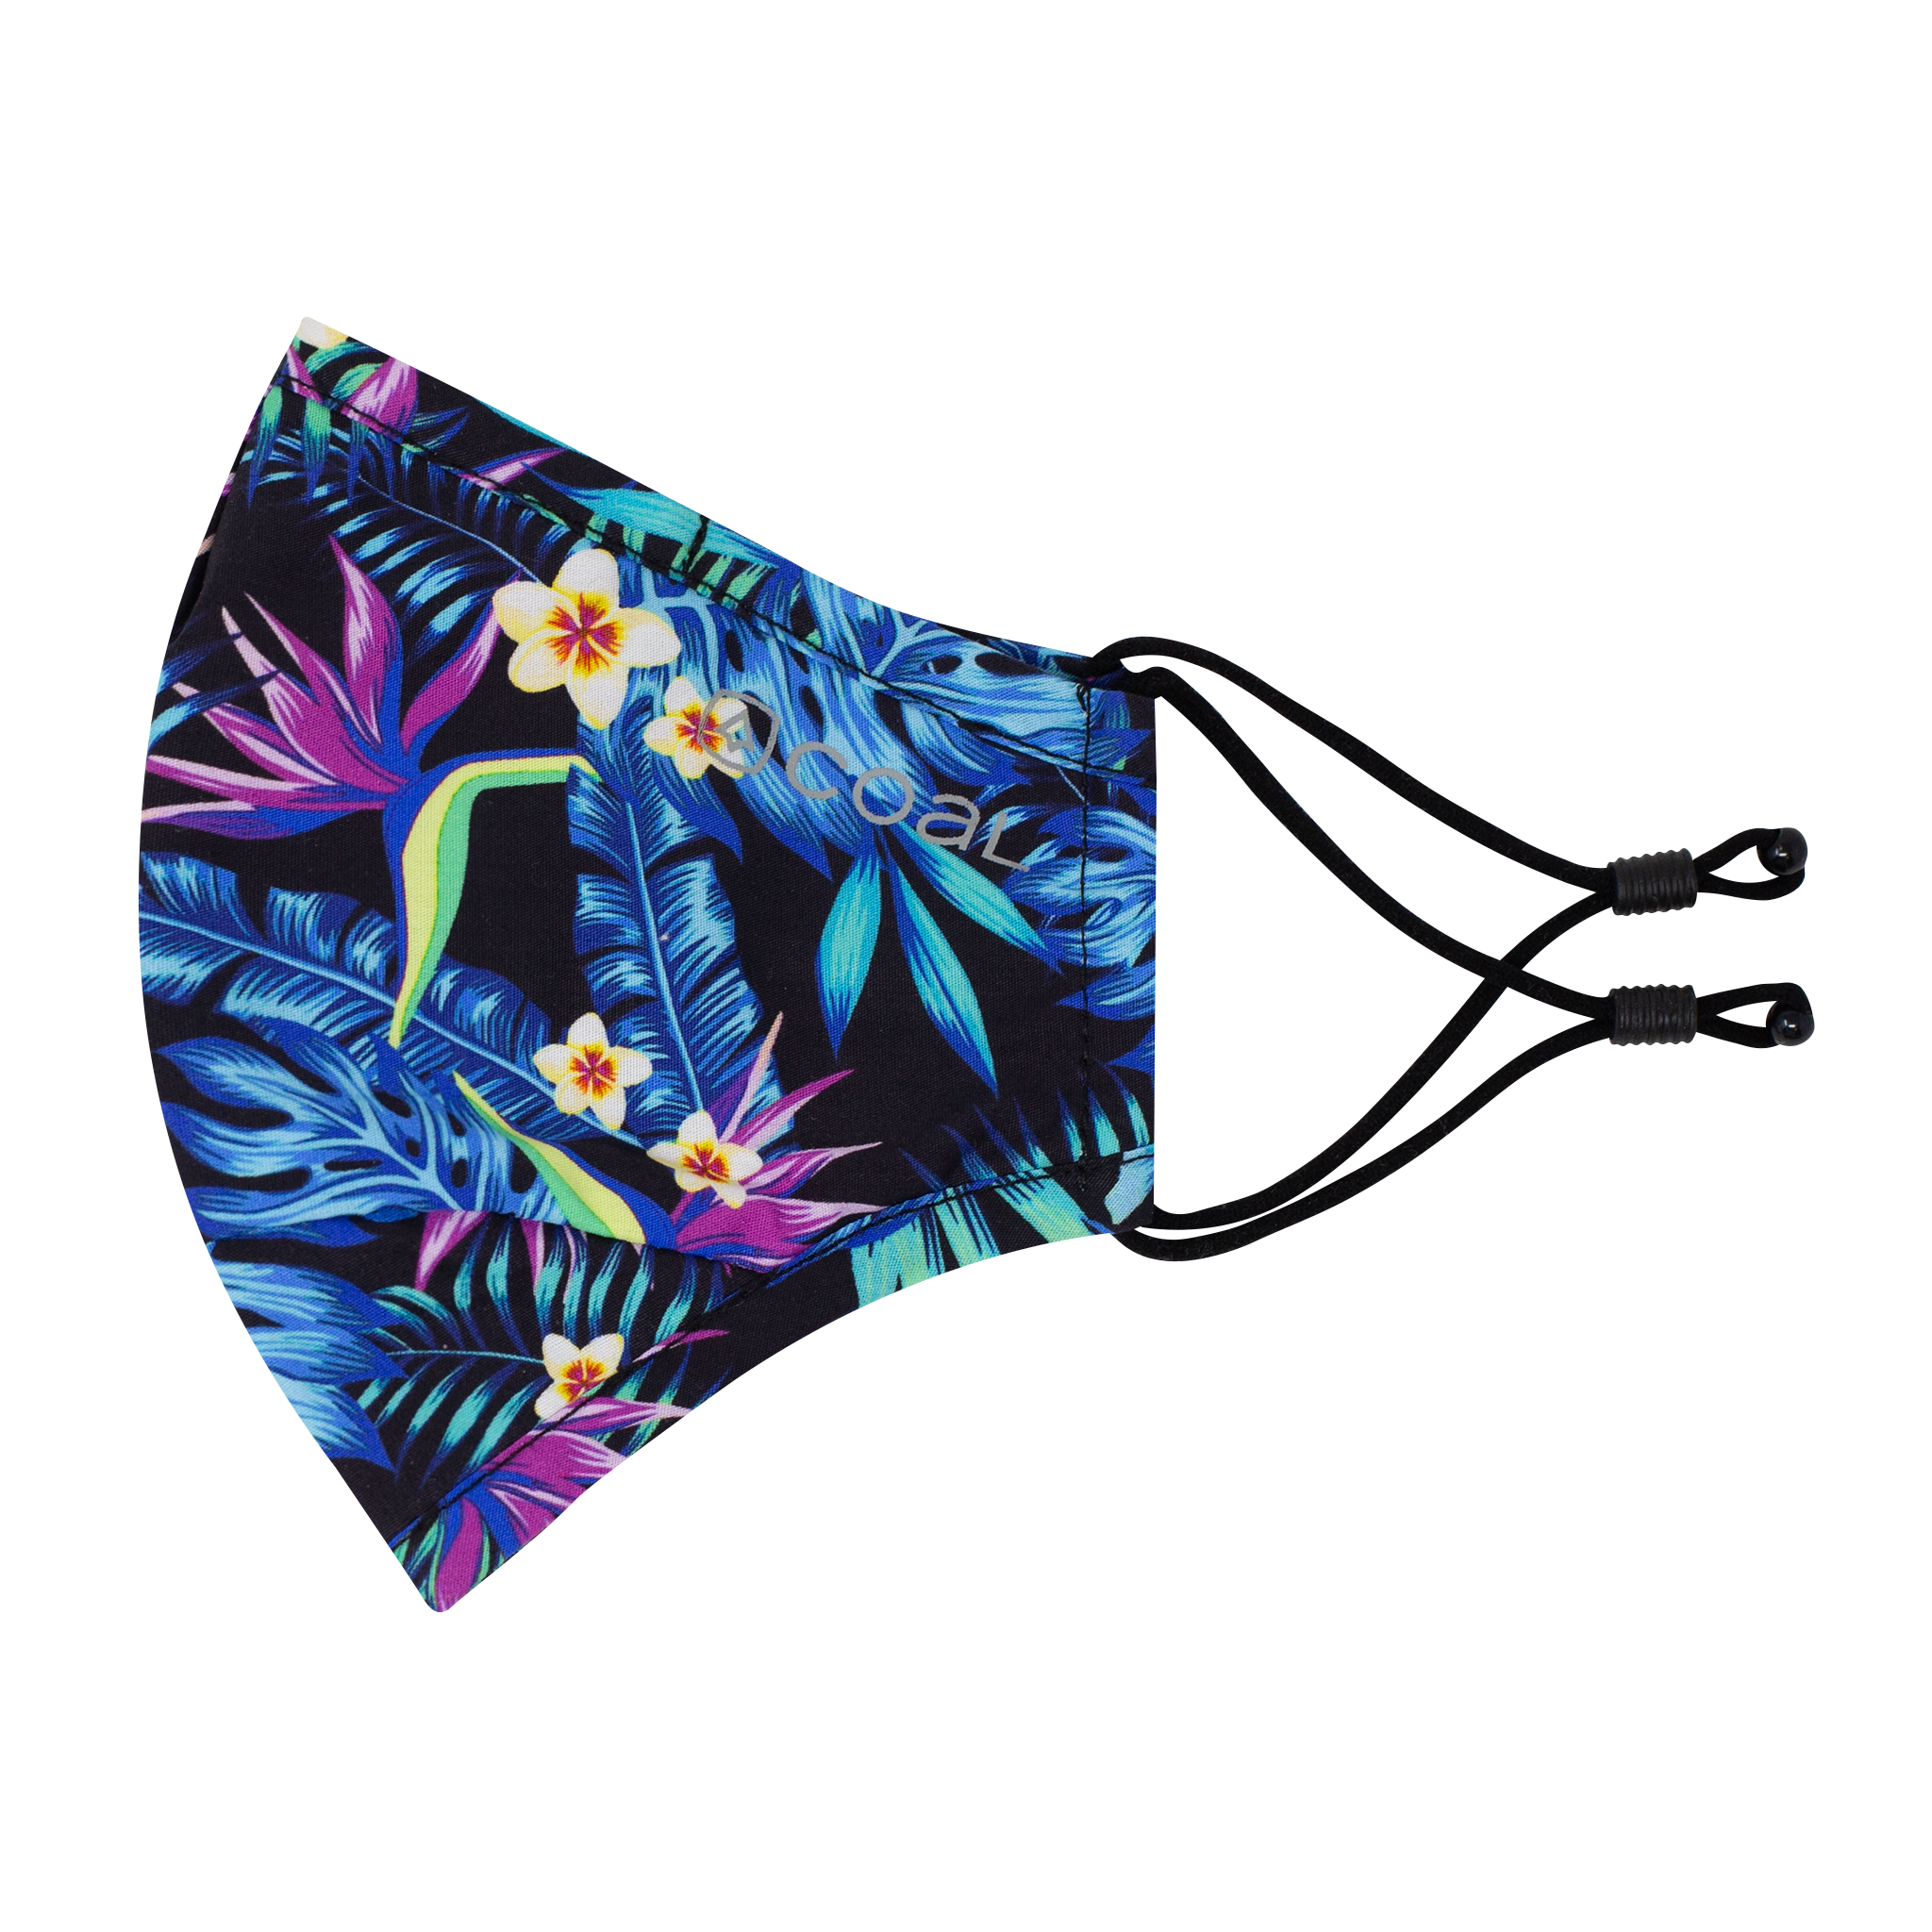 The Ergo Face Mask with Filter Pocket - Tropical Print, Black